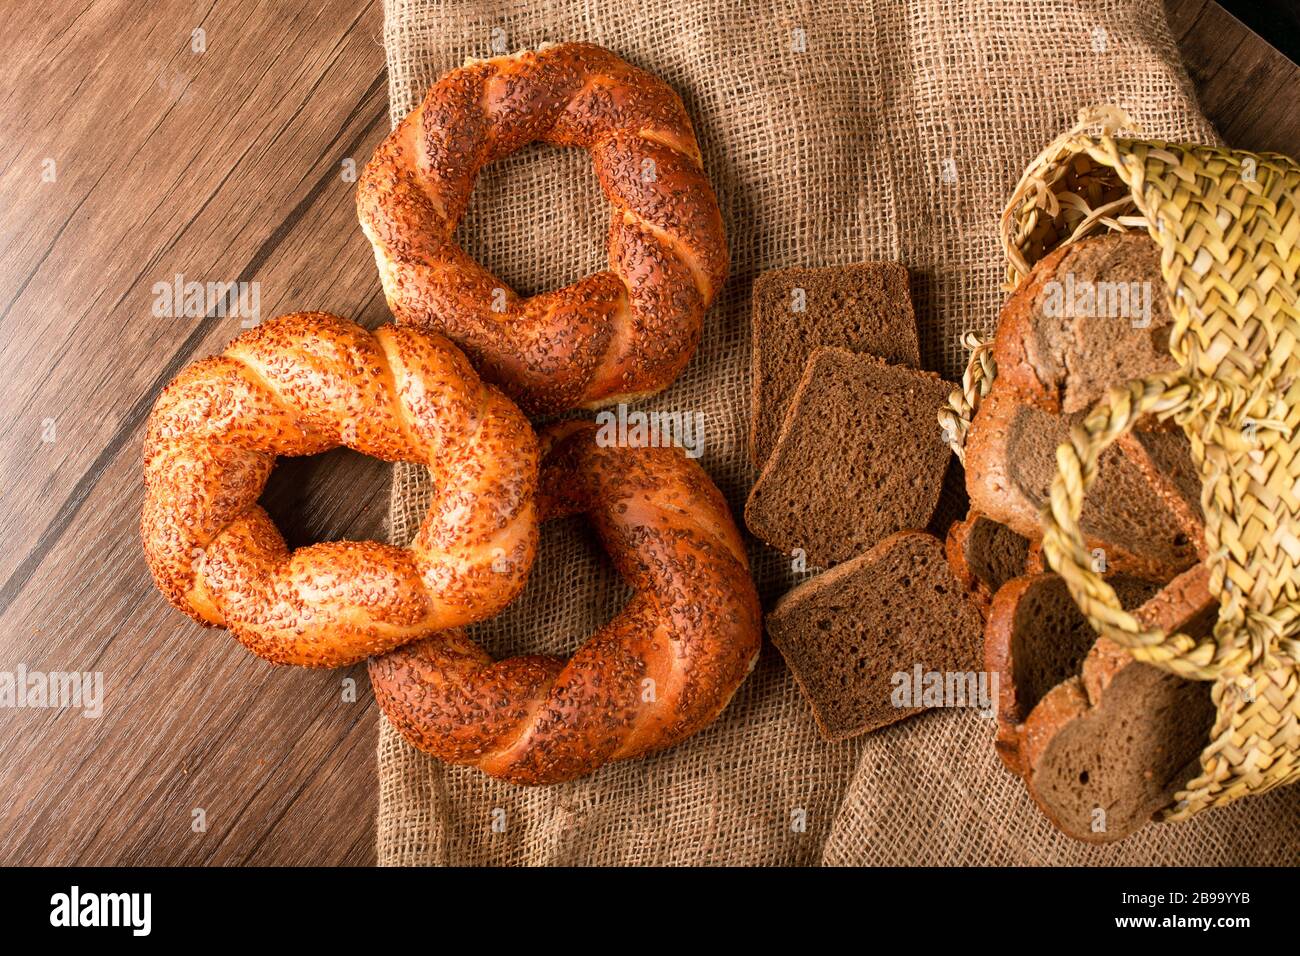 Bagel and slices of dark bread in basket Stock Photo